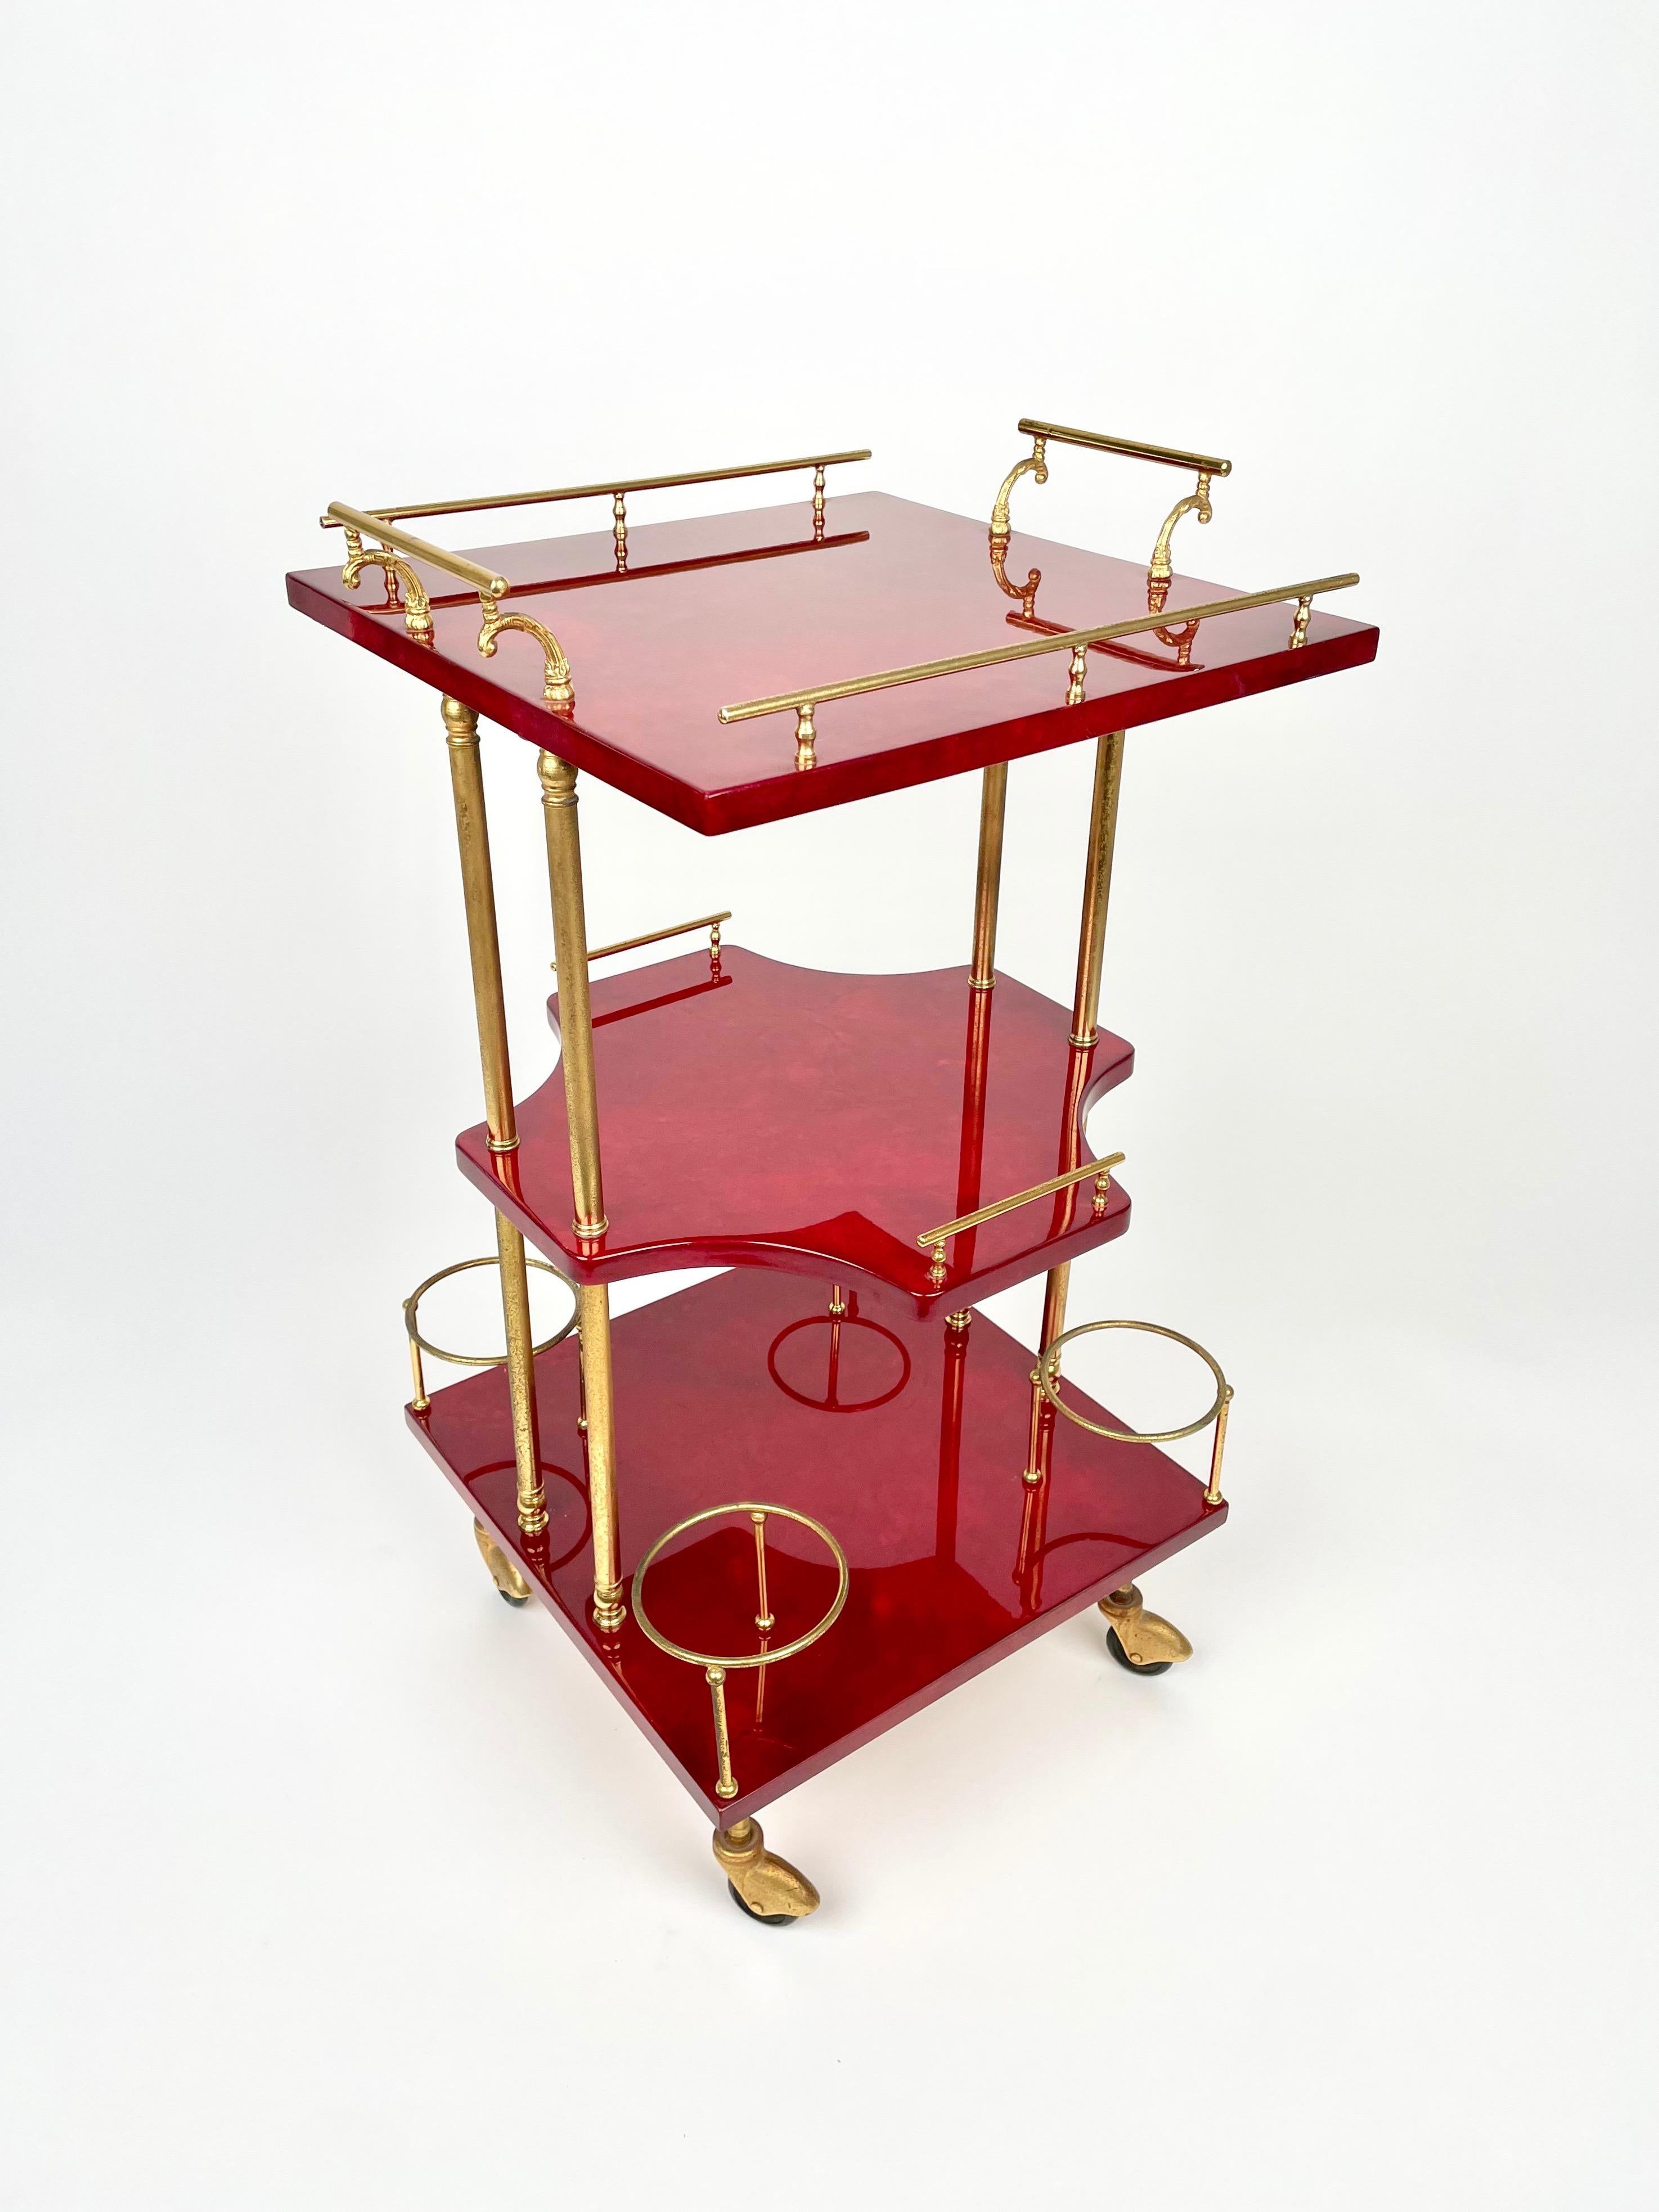 Wonderful bar cart of Aldo Tura in lacquered goatskin and brass.

This serving cart was executed, circa 1960 in a red parchment. 

The original label is still attached on the botton, as shown in the pictures.

Along with artists like Piero